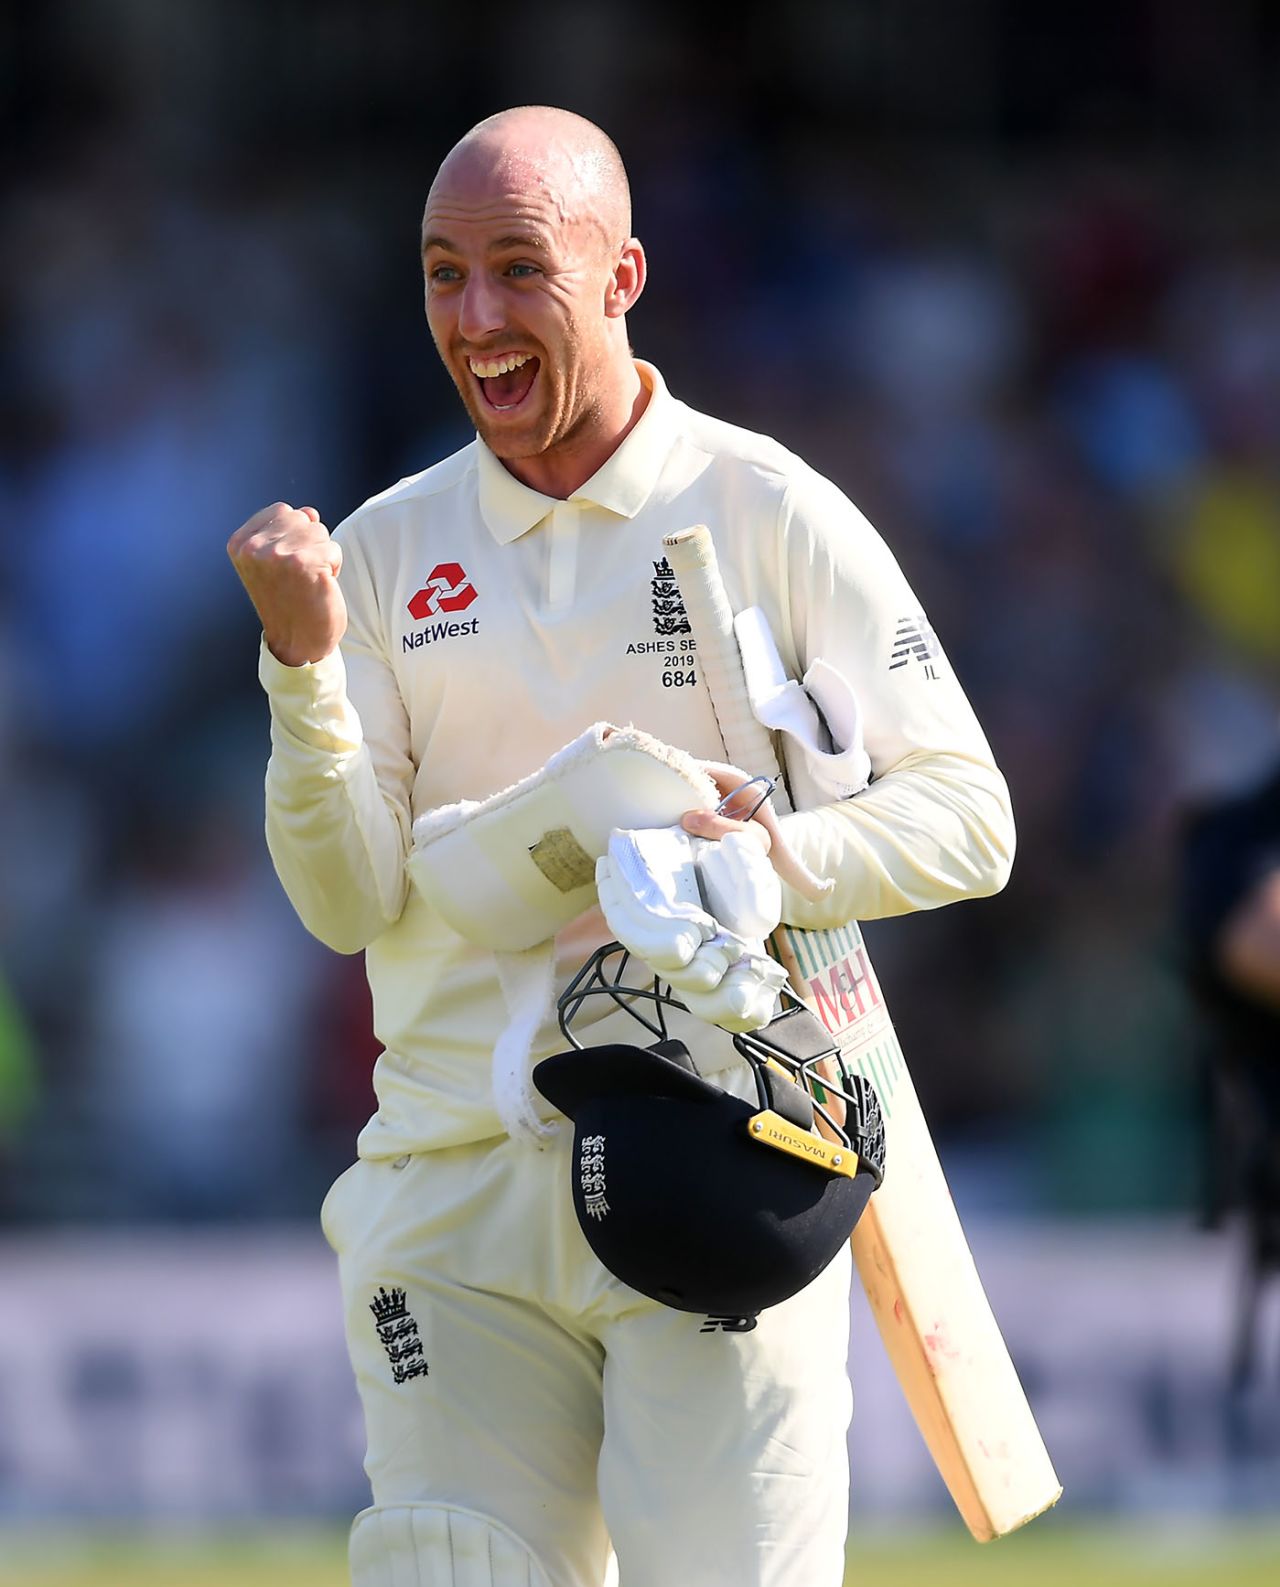 Jack Leach celebrates after Ben Stokes secures England's victory, England v Australia, 3rd Ashes Test, Headingley, August 25, 2019